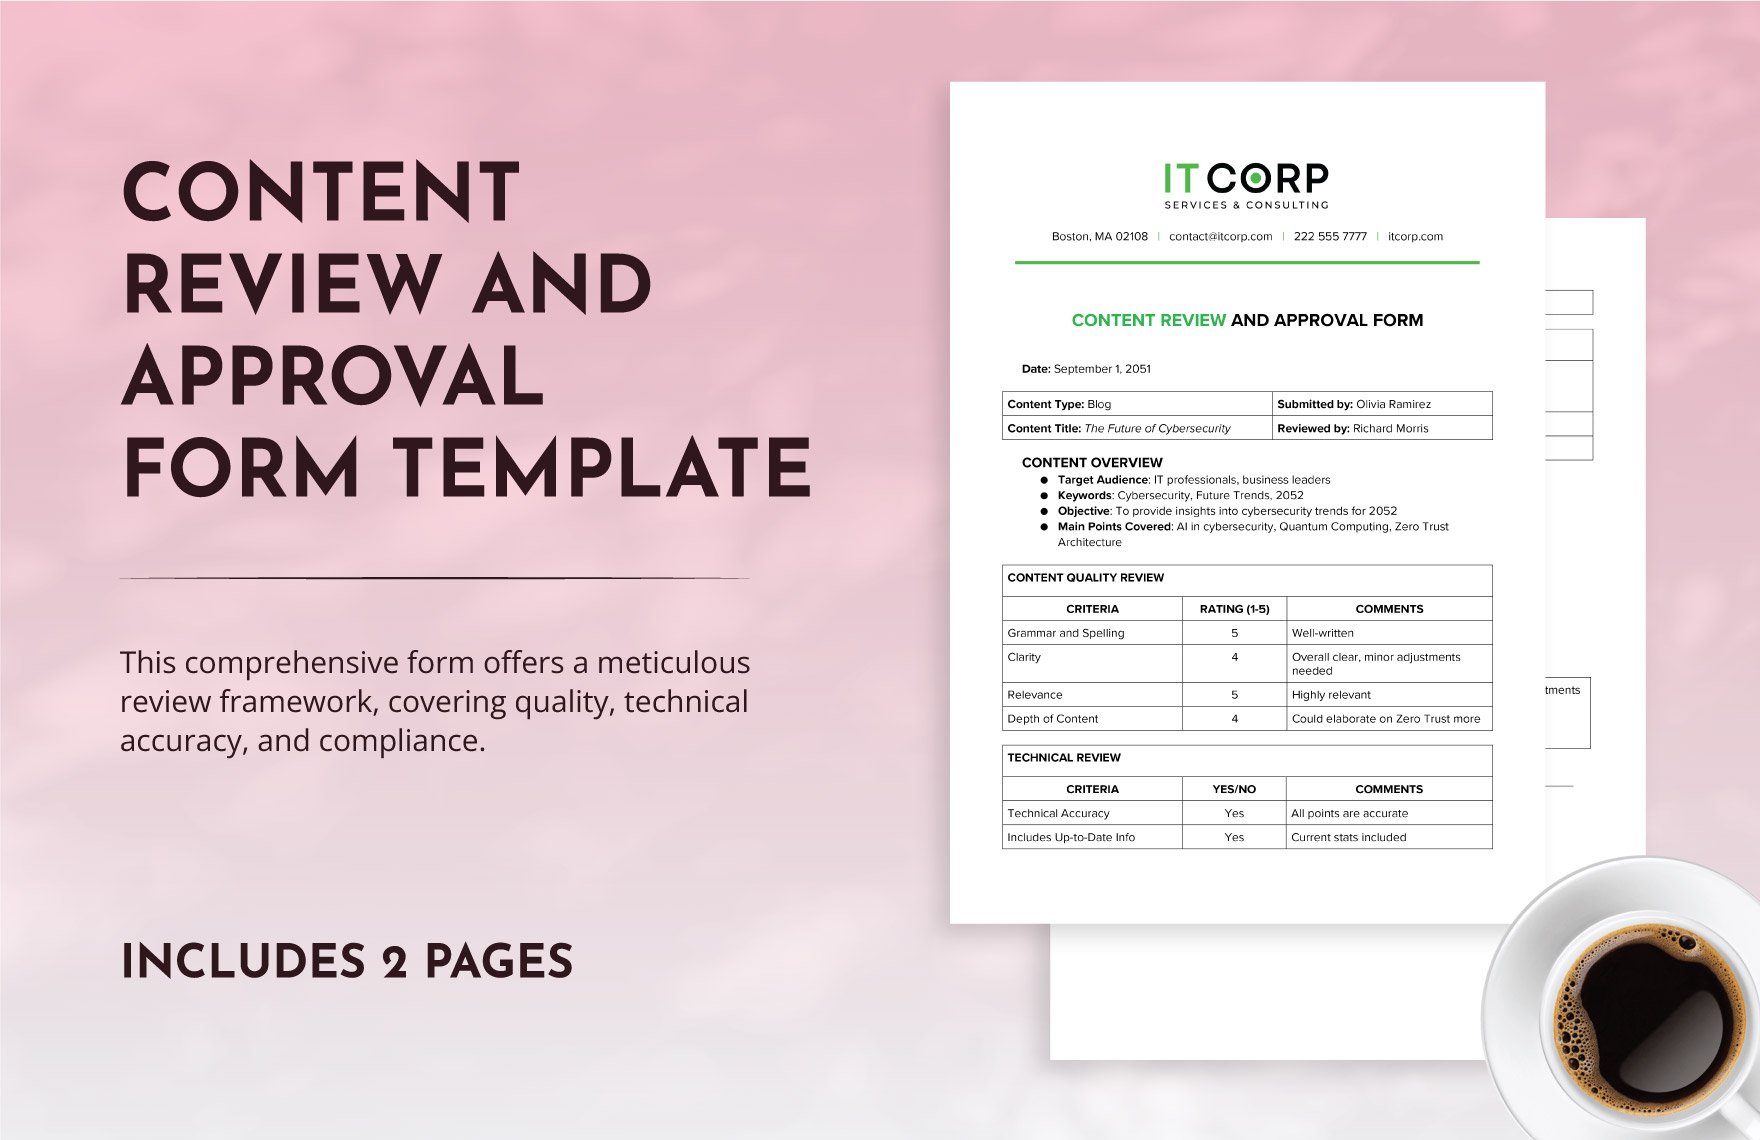 Content Review and Approval Form Template